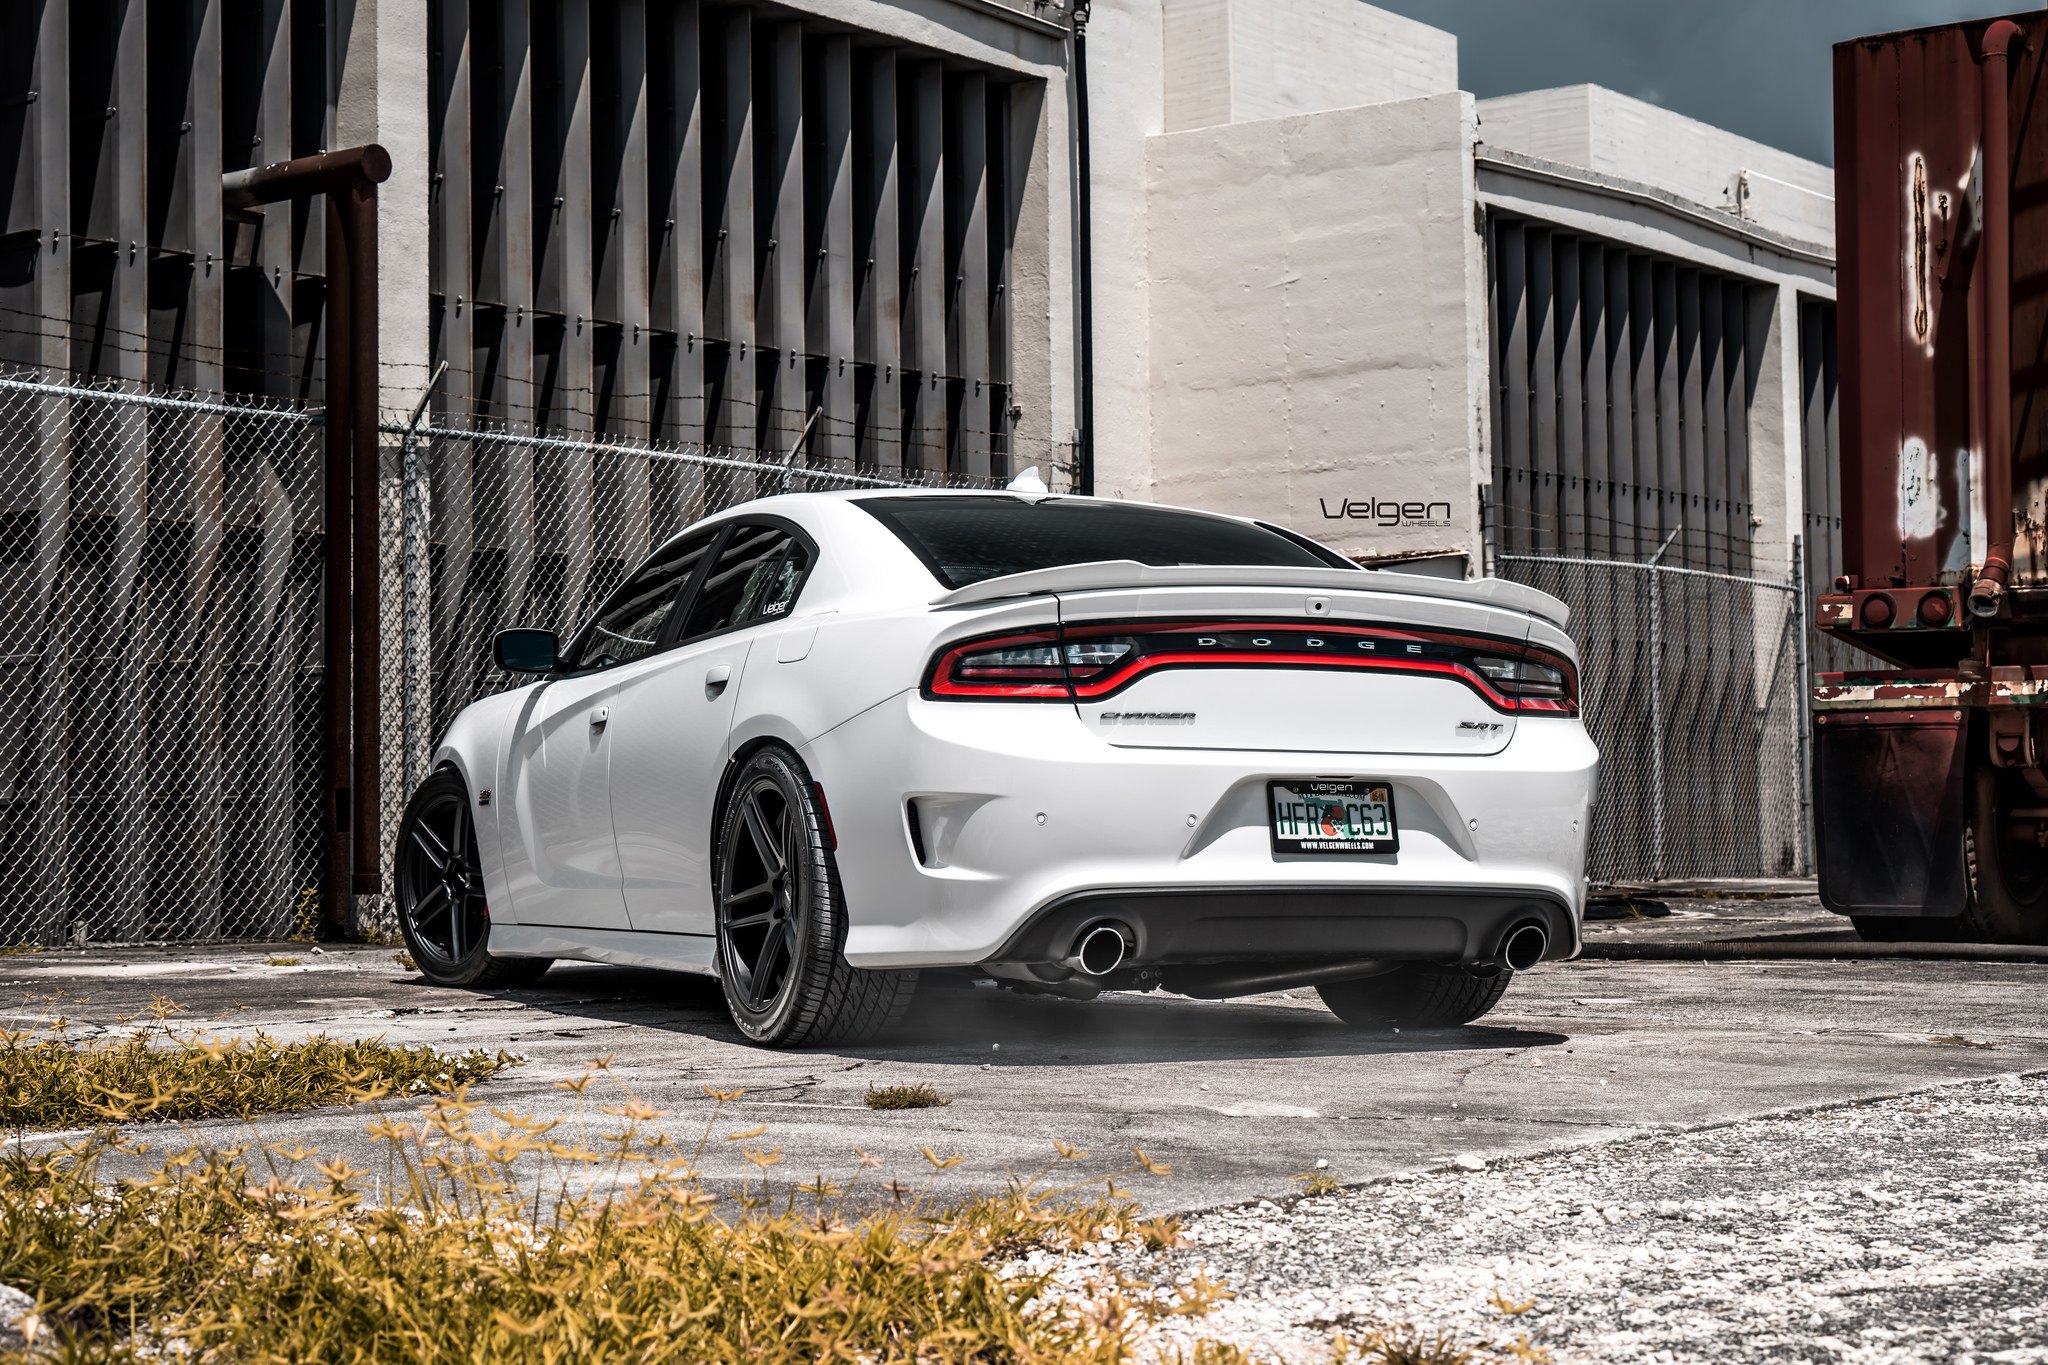 Aftermarket Rear Spoiler on White Dodge Charger - Photo by Velgen